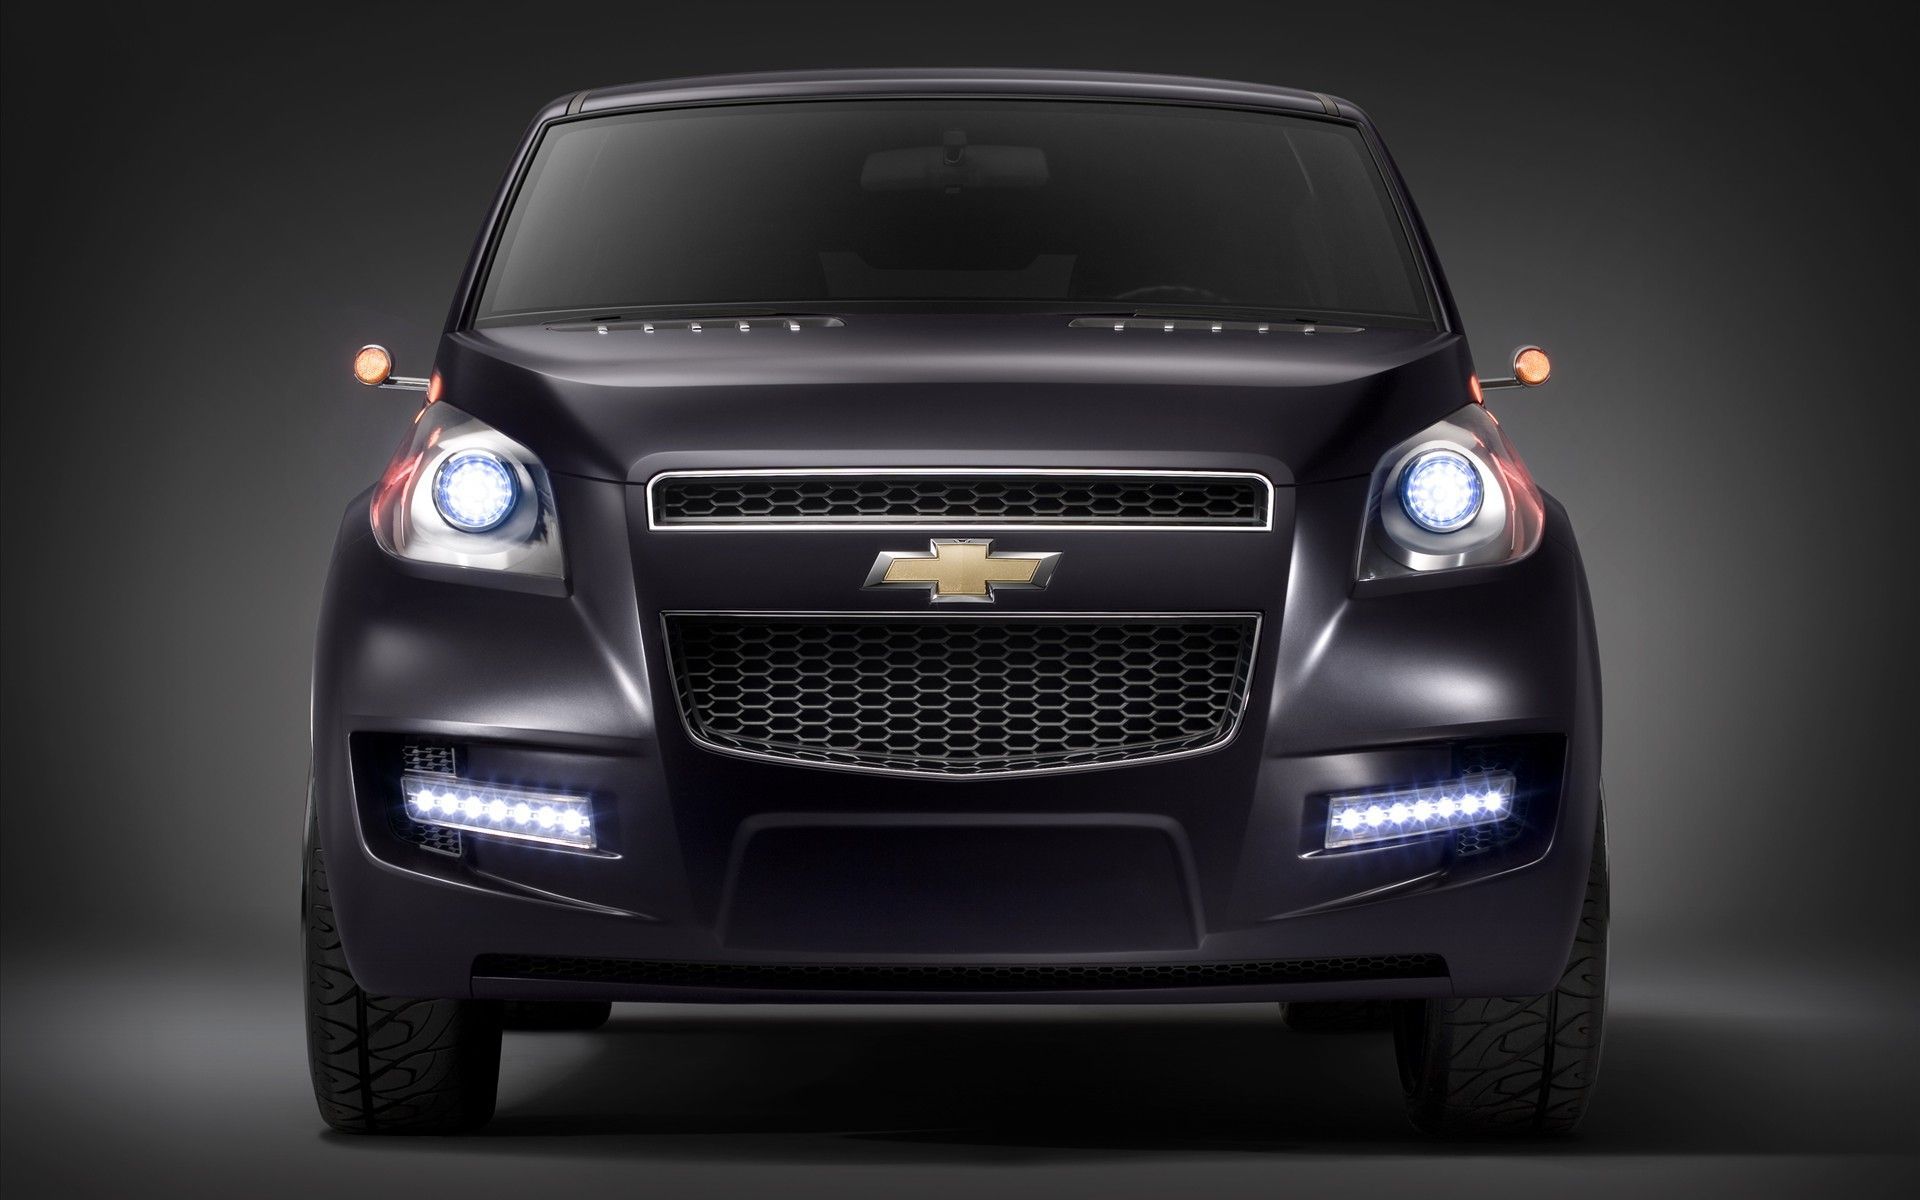 Chevrolet SUV 2013: Review, Amazing Pictures and Images – Look at the car